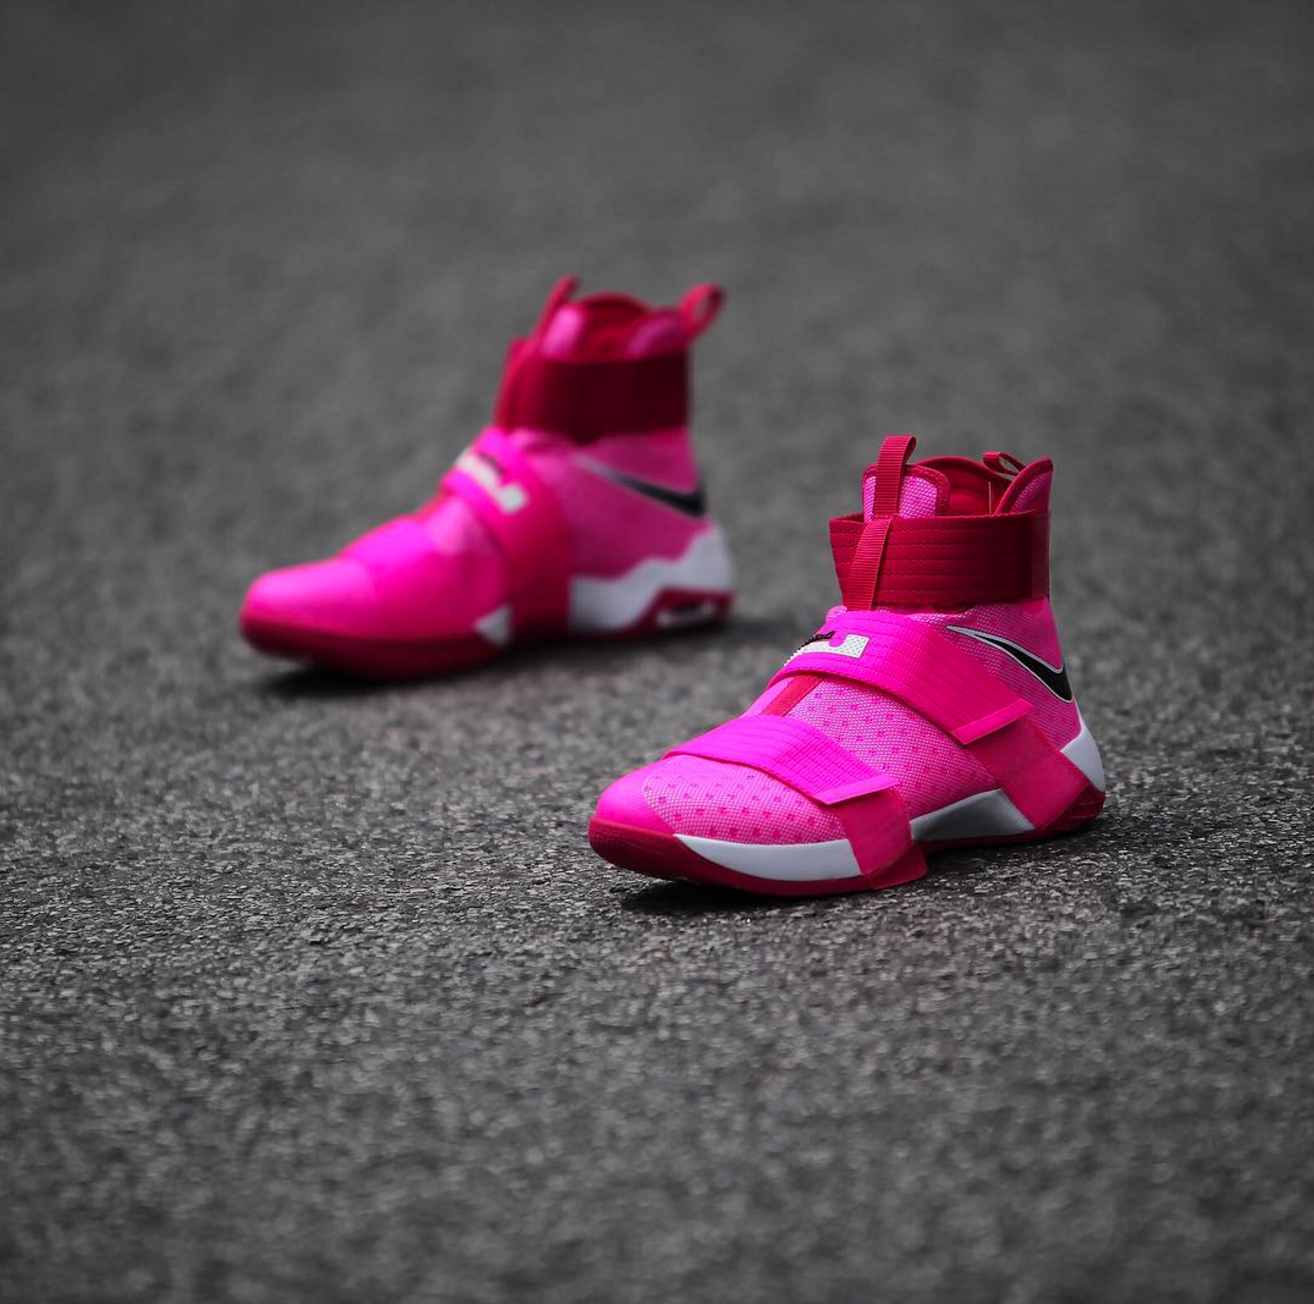 A Nike LeBron Soldier 10 for Breast 